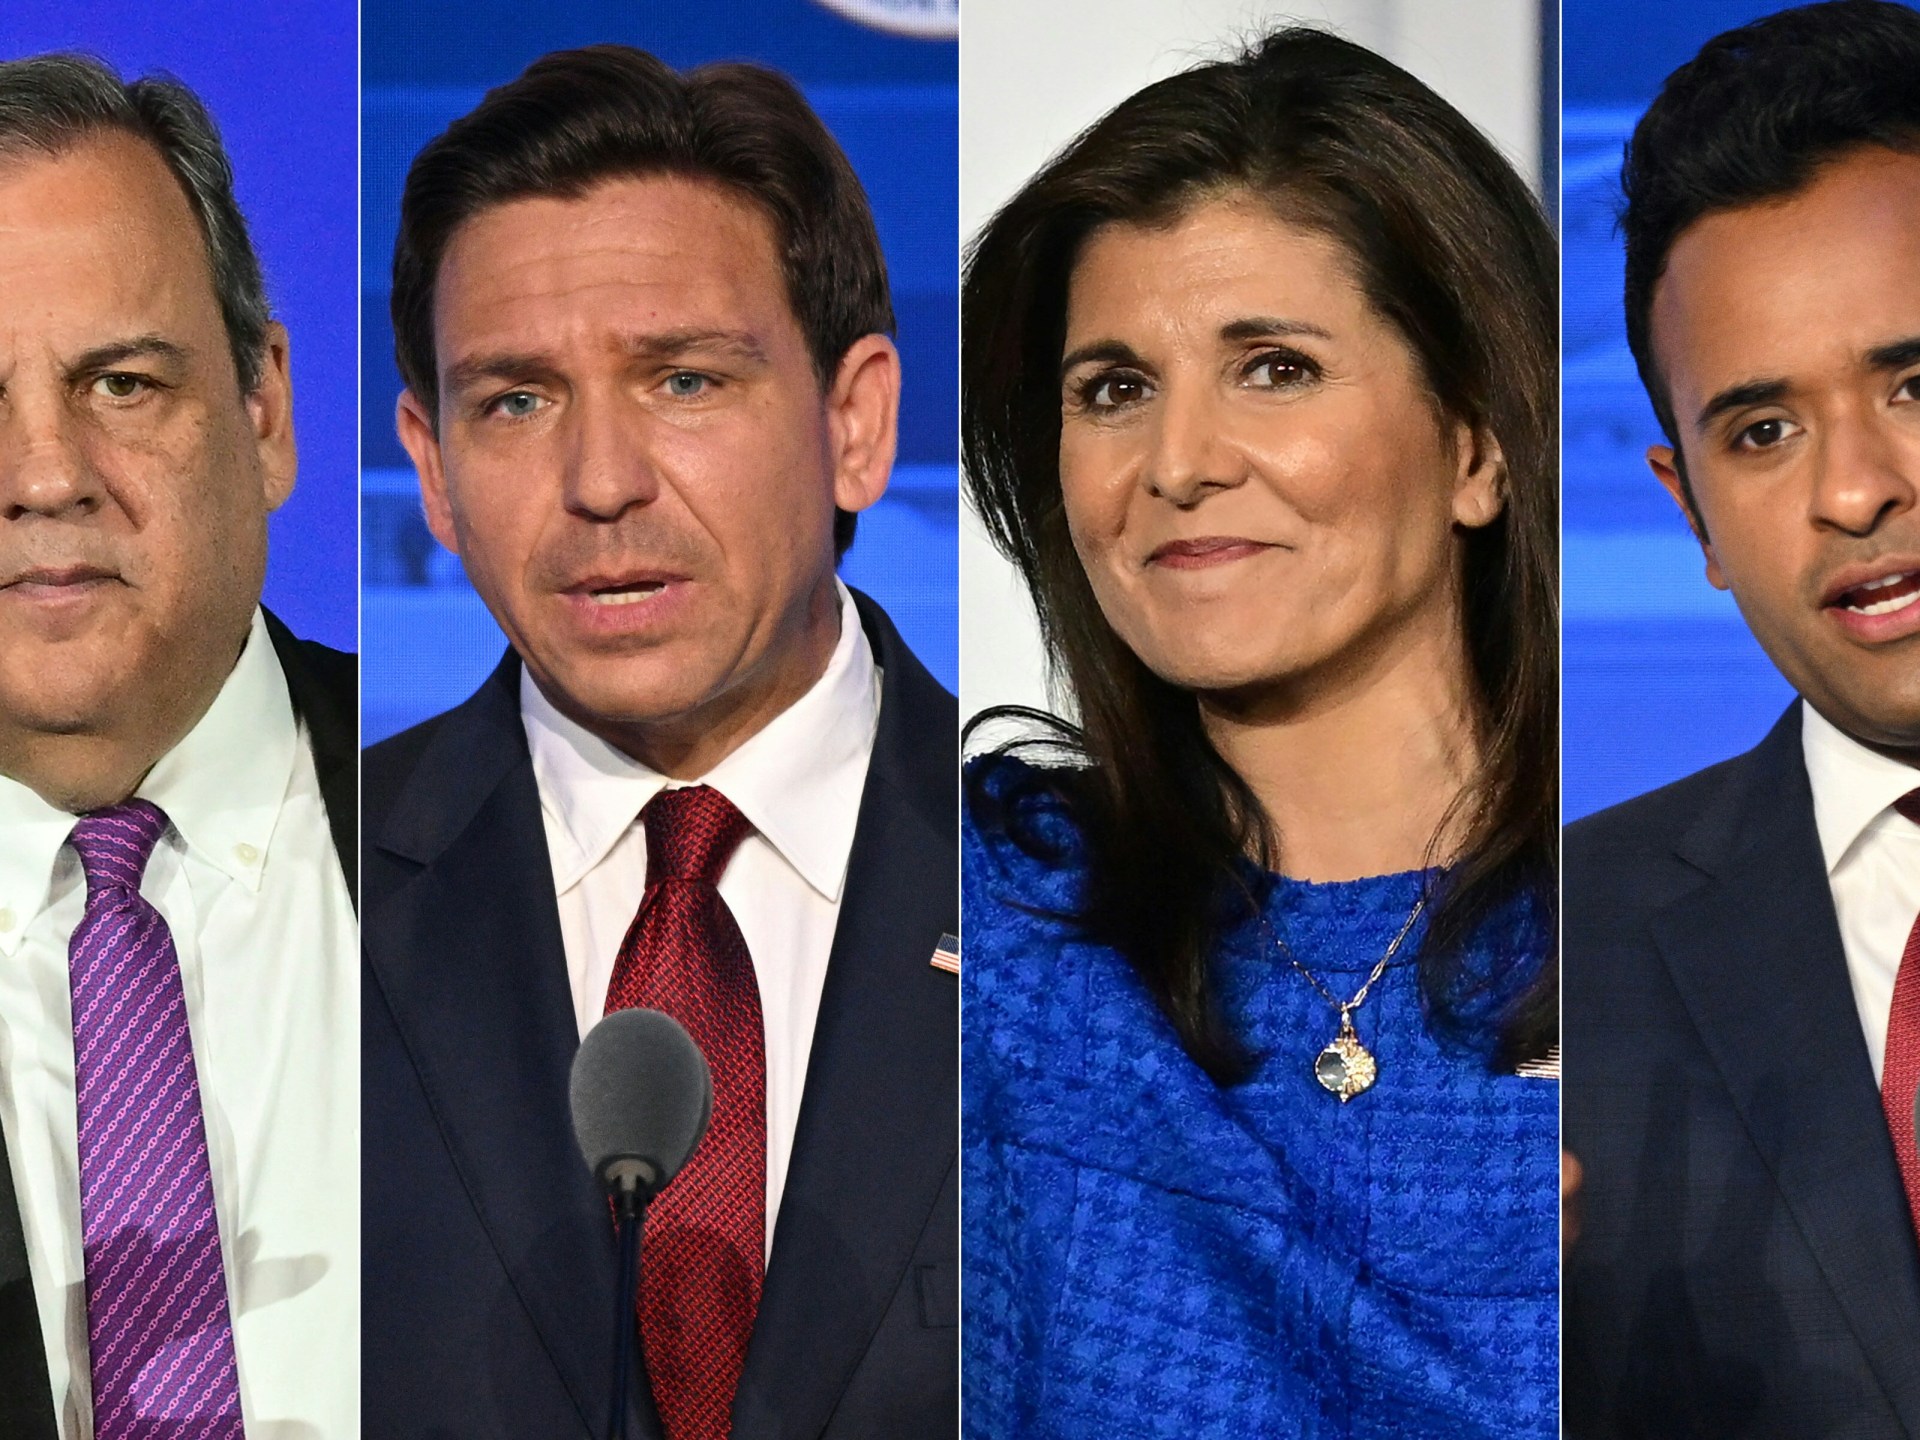 US presidential hopefuls face off in fourth Republican primary debate | Elections News